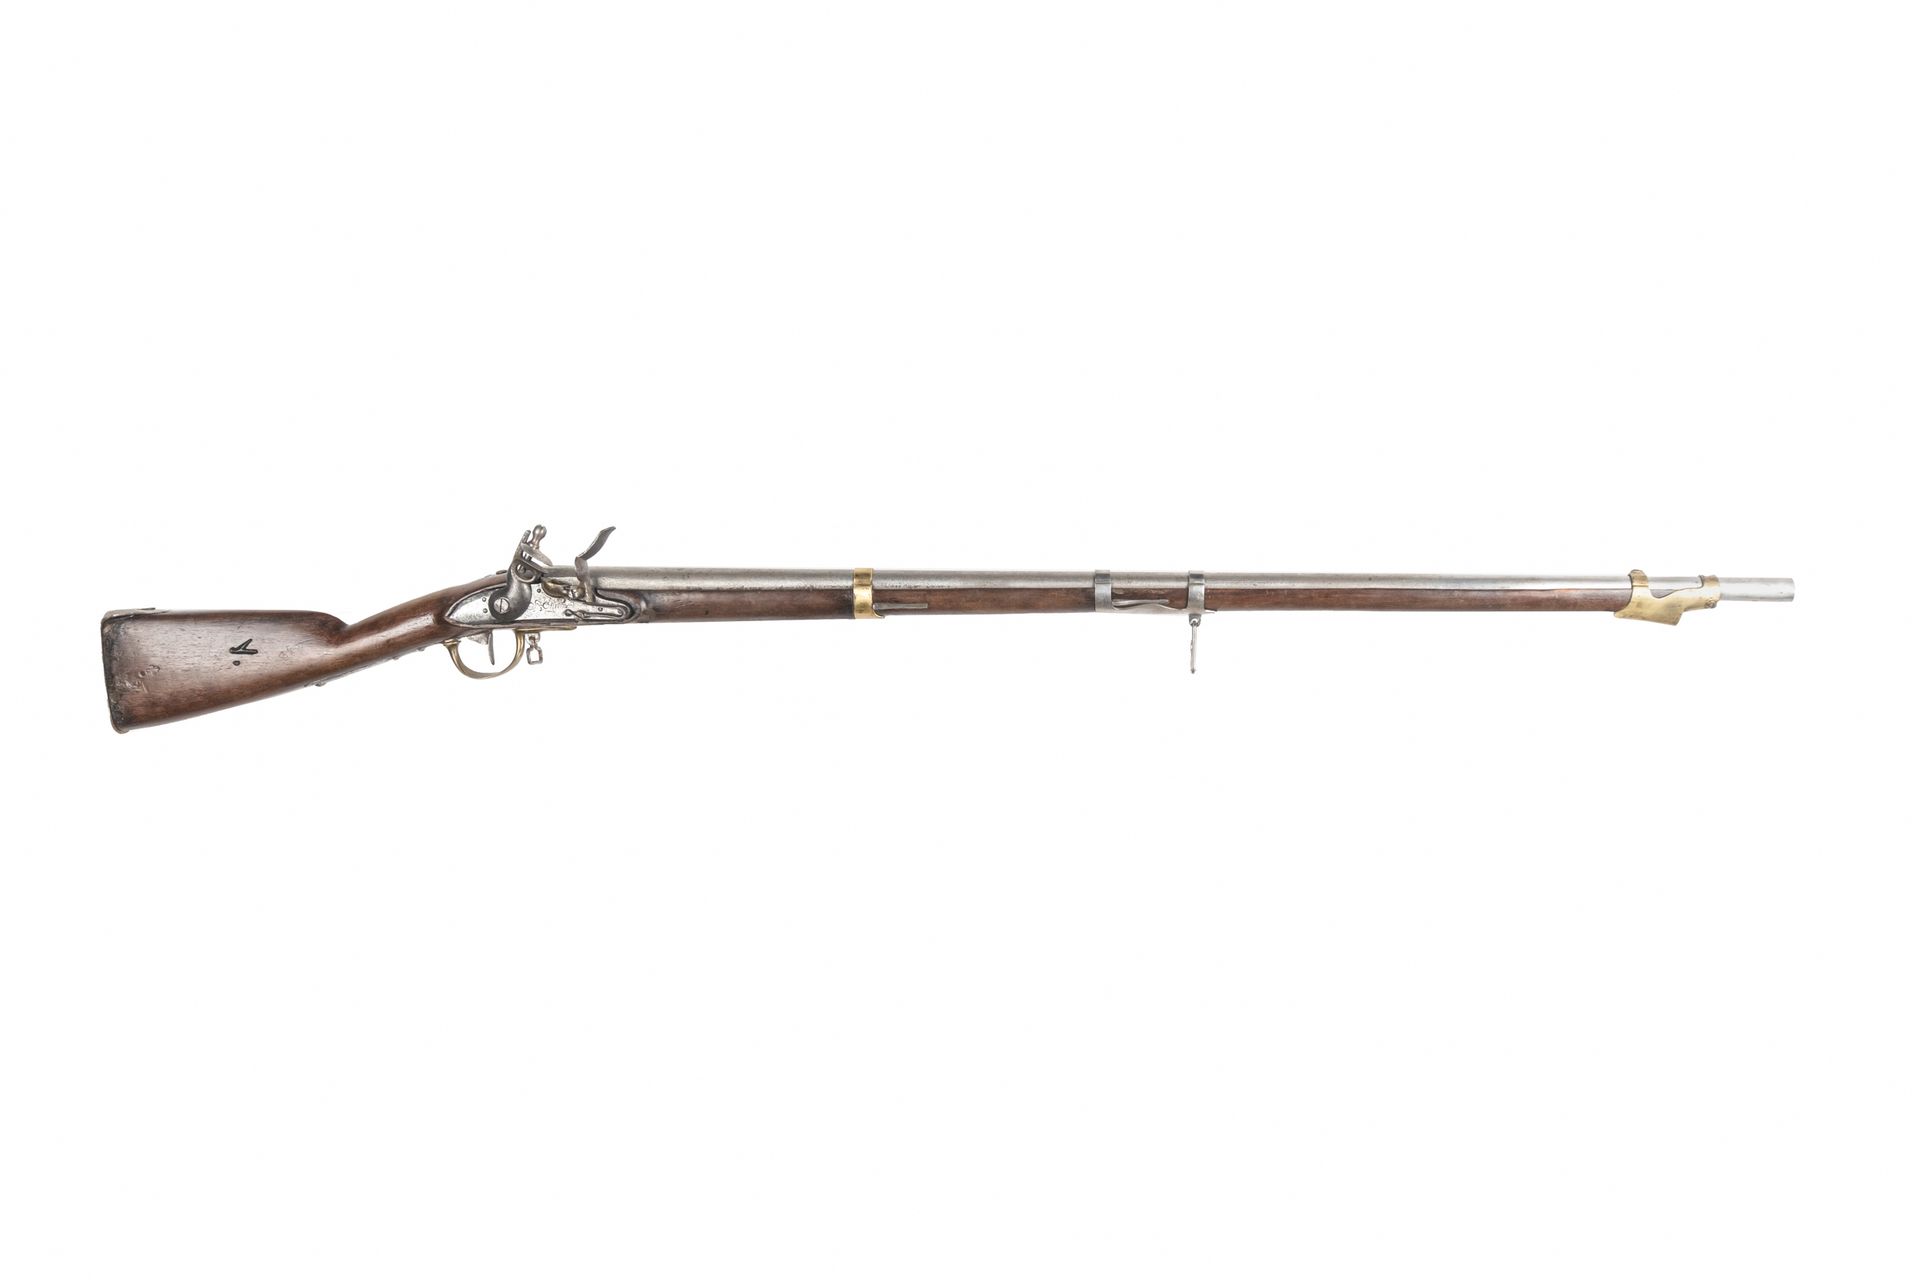 Null Dragon flintlock rifle model 1777

Round barrel, with sides to the thunder.&hellip;